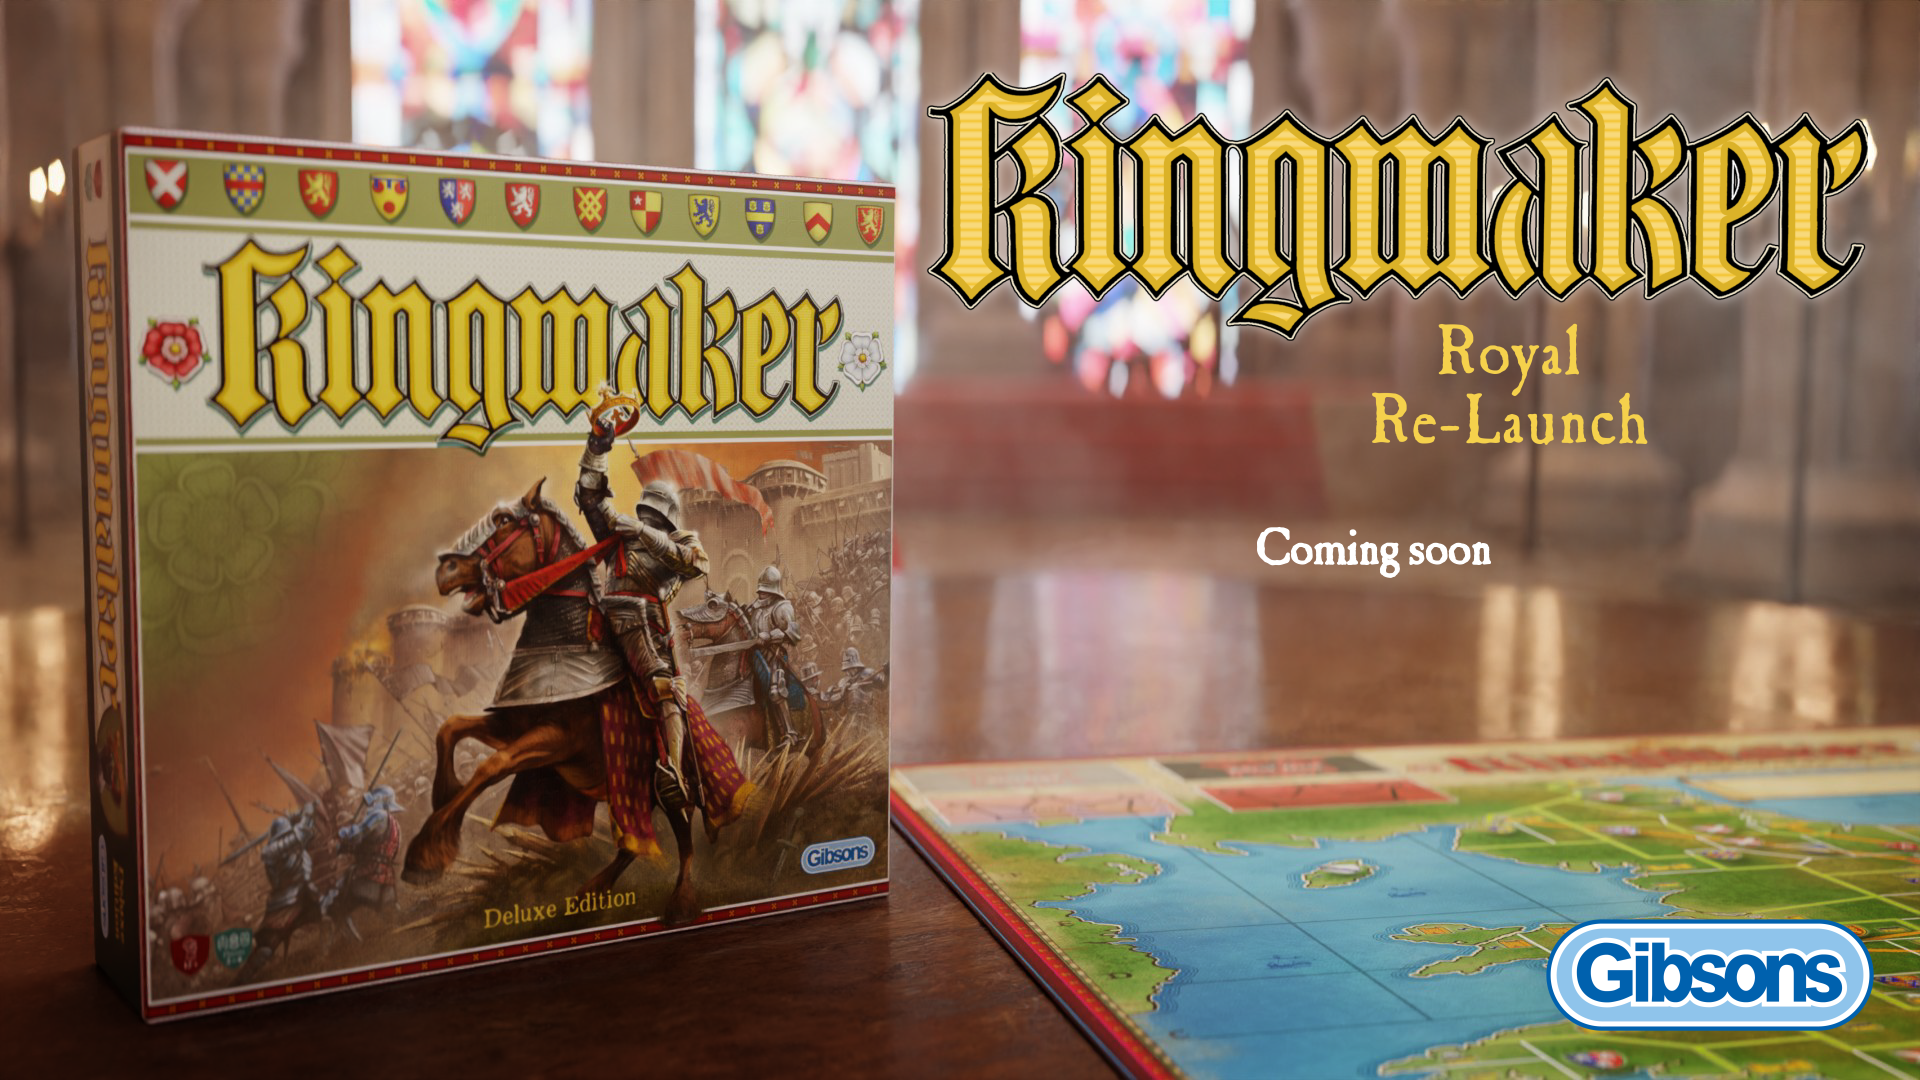 Kingmaker: The Royal Relaunch - Funded in 20 hours!